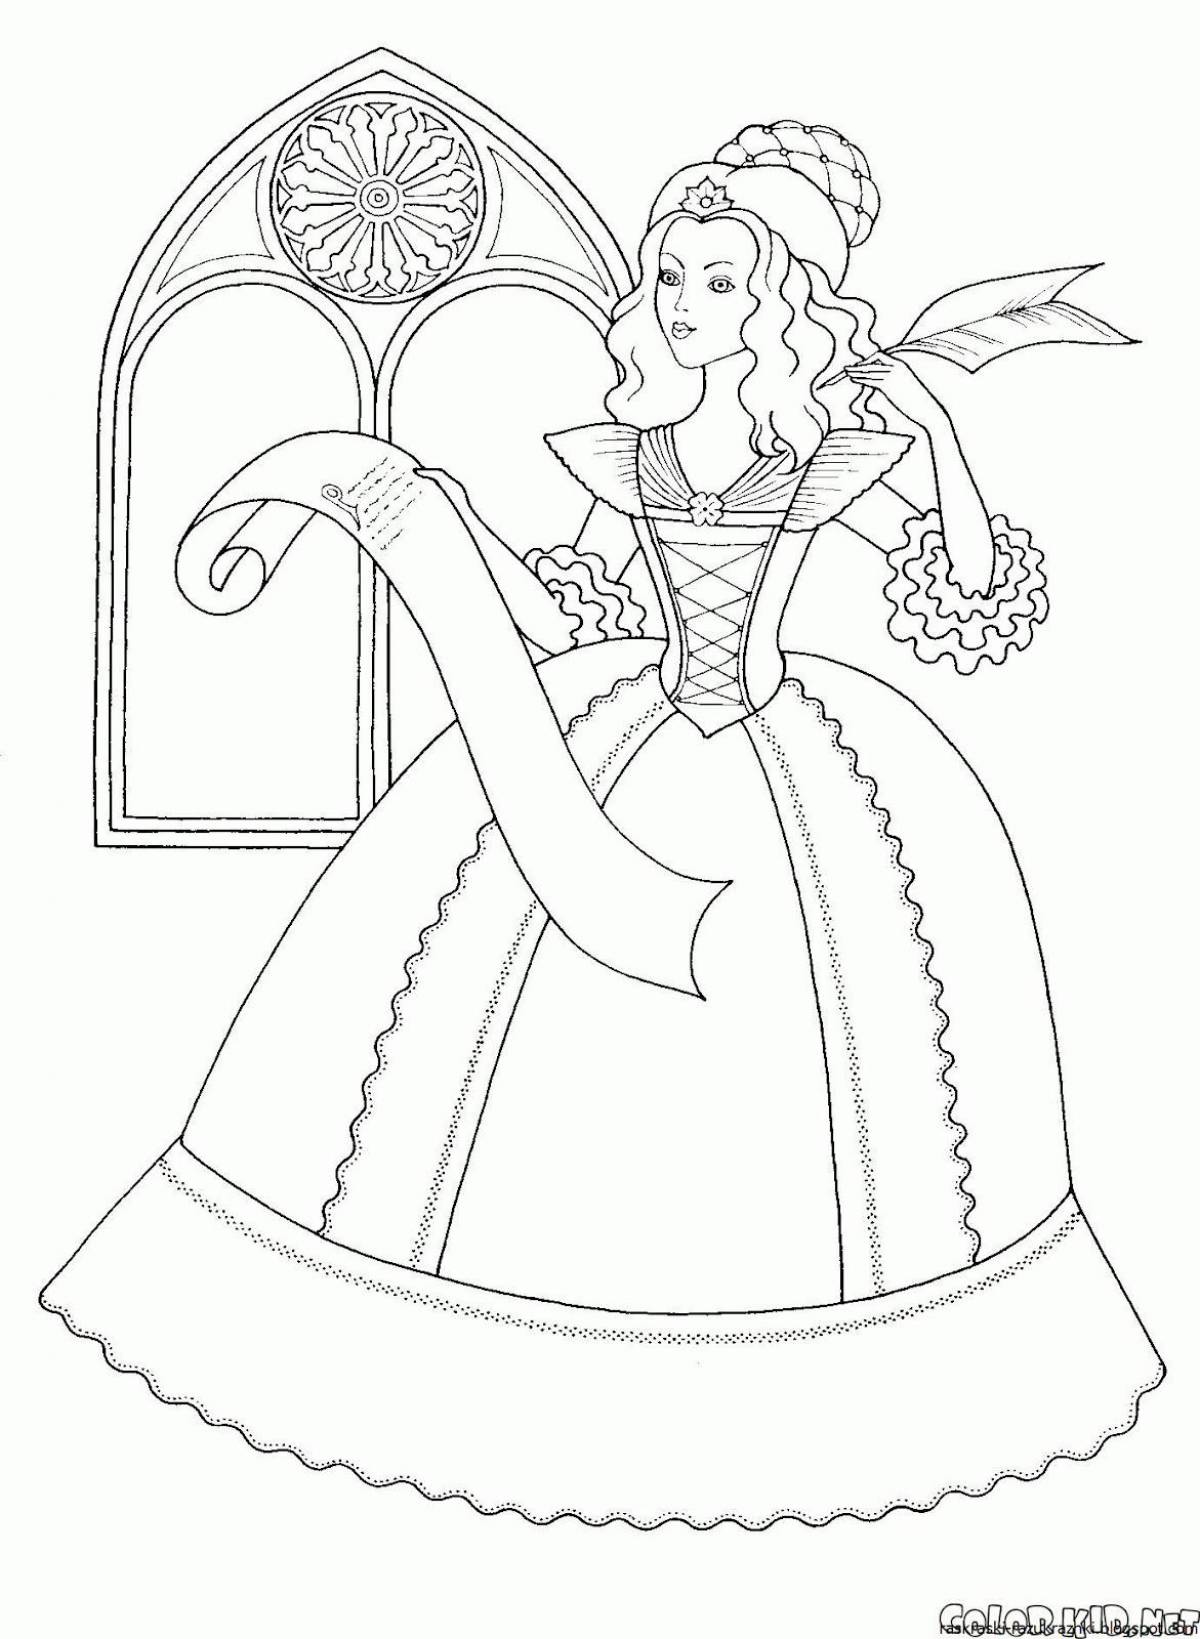 Colorful coloring book for children 6-7 years old princess